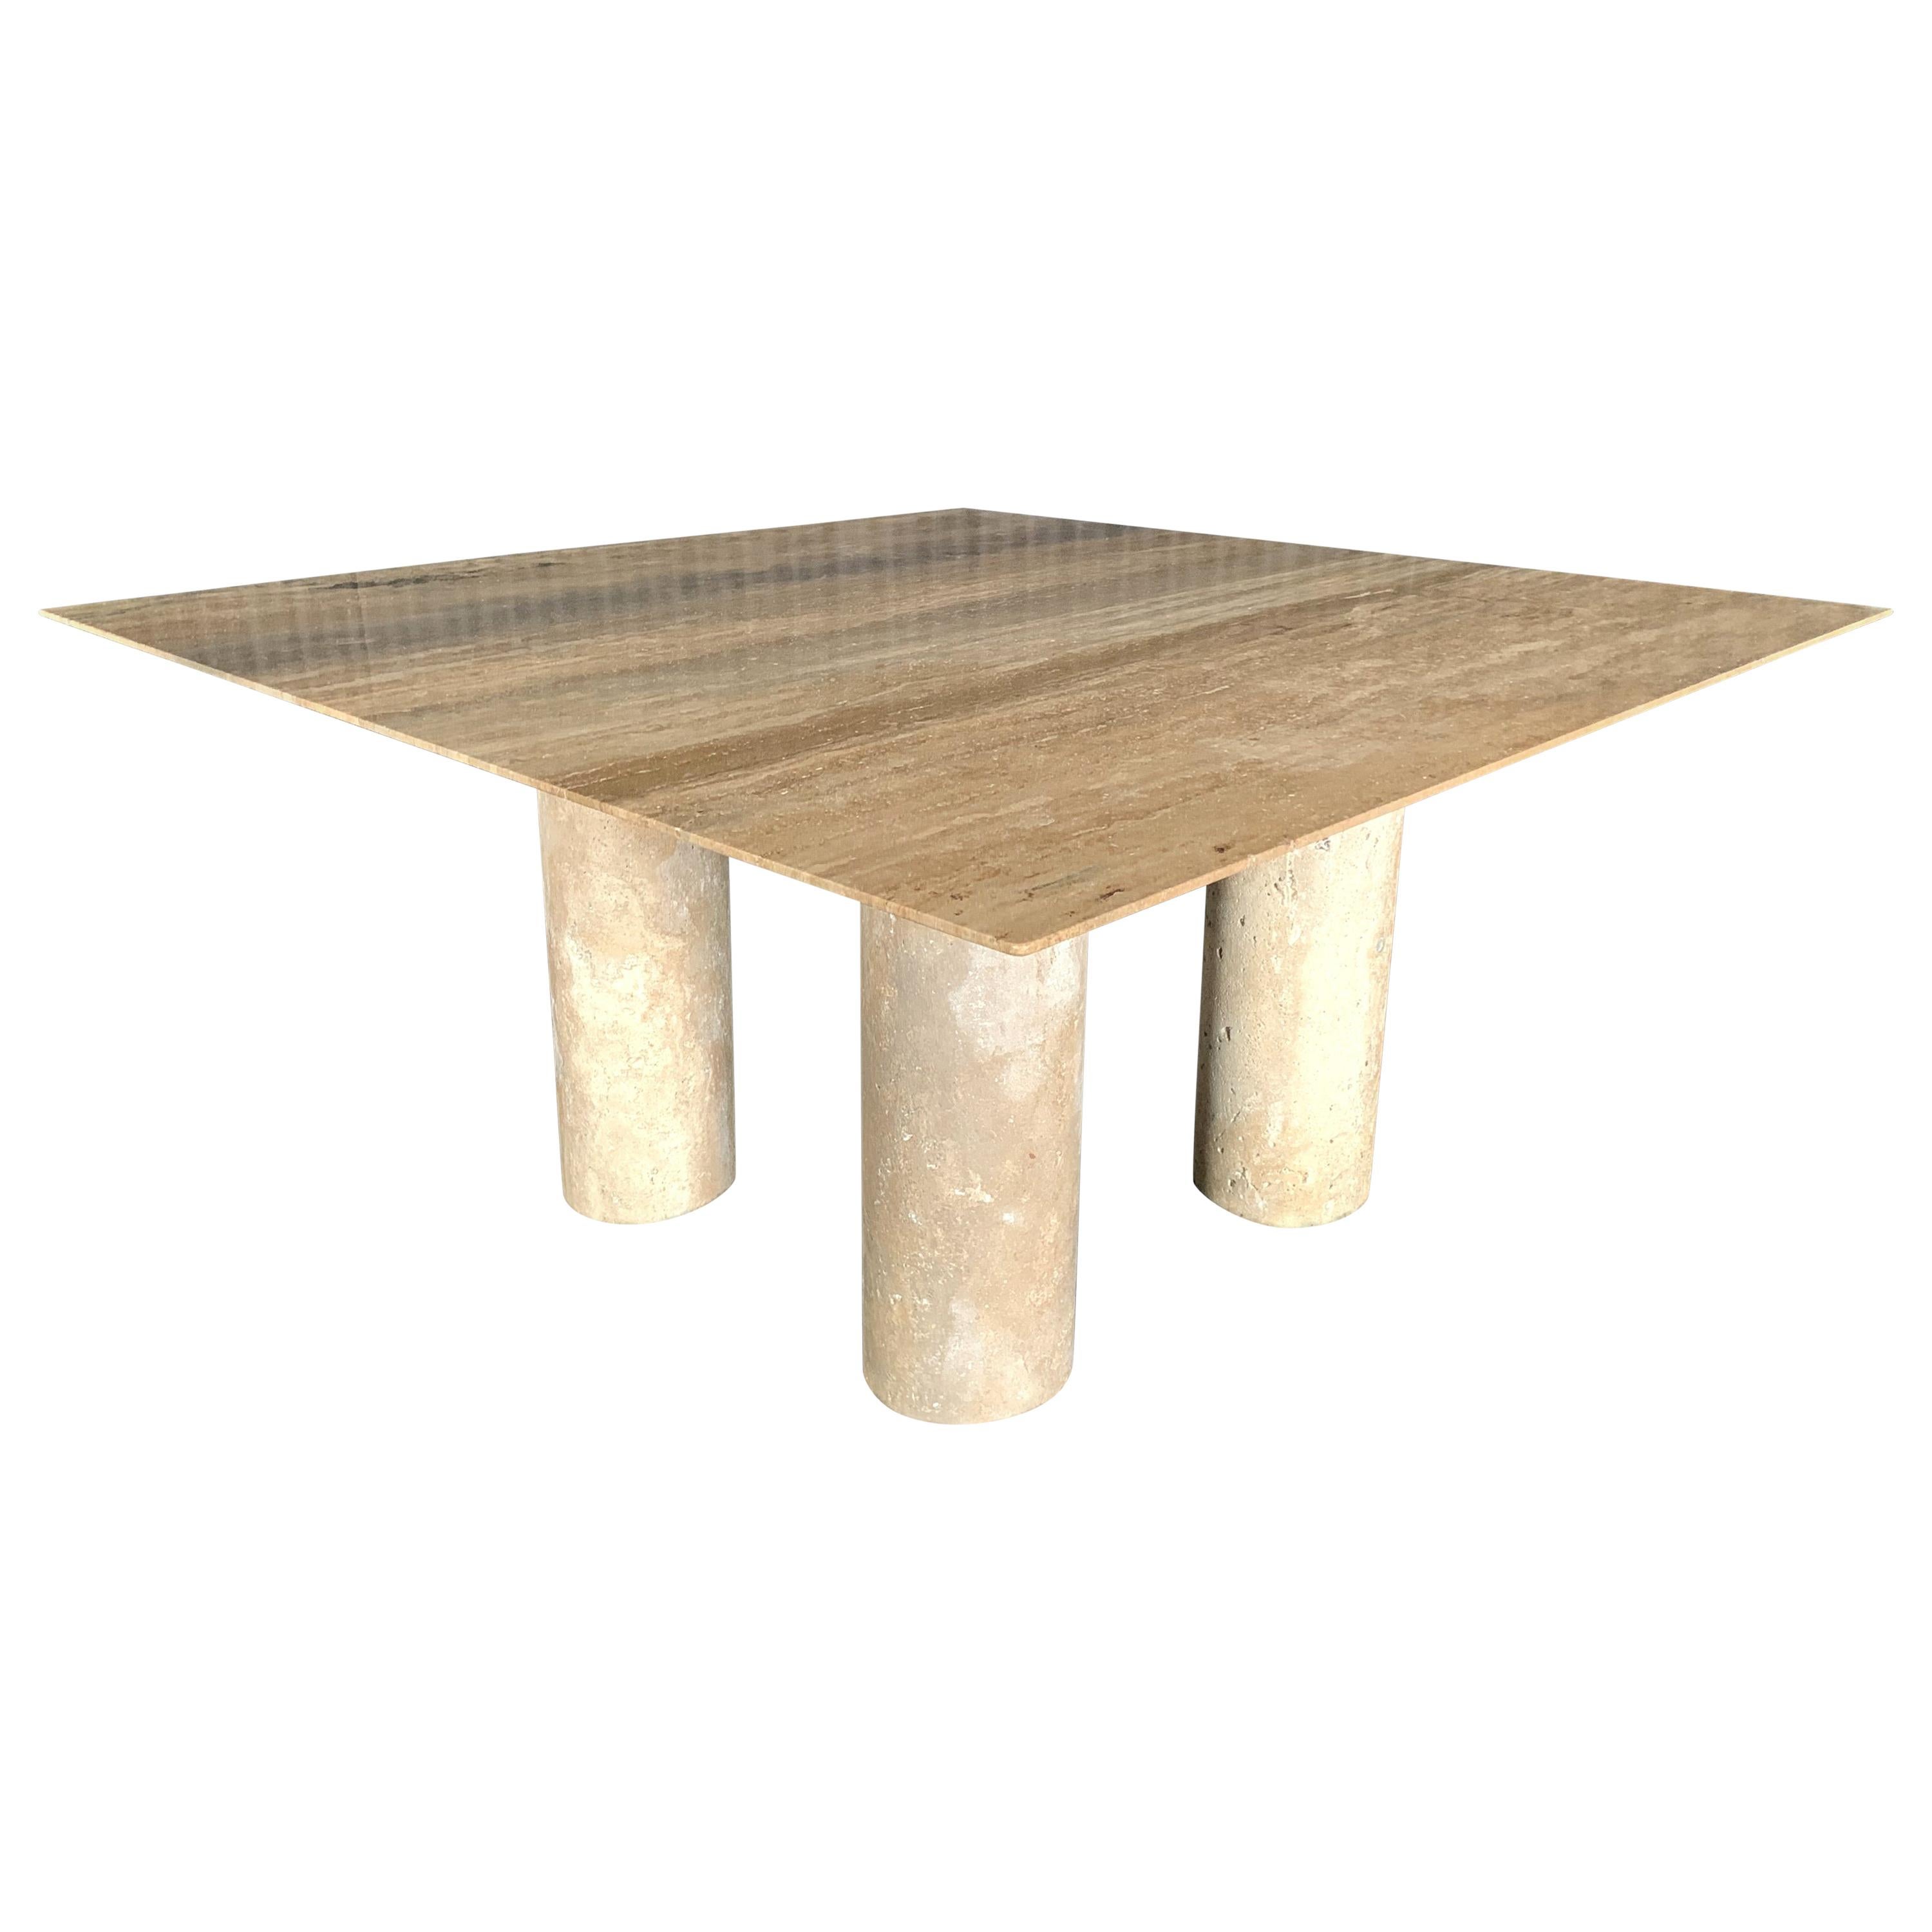 Monumental Travertine Dining Table, after Mario Bellini